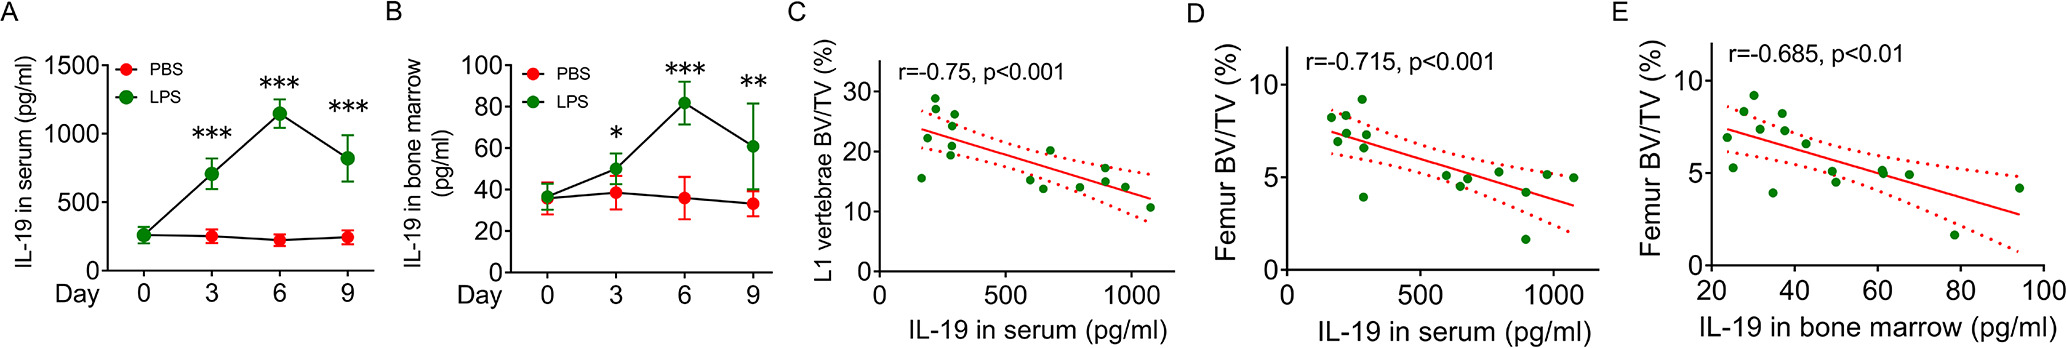 Fig. 2 
            The involvement of interleukin (IL)-19 accumulation in serum and bone marrow in trabecular bone loss. a) IL-19 levels in peripheral blood serum in lipopolysaccharide (LPS)-induced bone loss of mice on Day 0, 3, 6, and 9, determined by enzyme-linked immunosorbent assay (ELISA) (n = 8). b) IL-19 levels in femur bone marrow aspirates in LPS-induced bone loss of mice on Day 0, 3, 6, and 9, determined by ELISA (n = 8). c) and d) The correlation of IL-19 levels in serum with bone volume fraction (BV/TV) of c) L1 vertebrae and d) femur. e) The correlation of IL-19 levels in bone marrow aspirates with BV/TV of femur. Data are representative of three independent experiments. Data are shown as means and standard deviations. P-values were determined by two-way analysis of variance (ANOVA) followed by Tukey’s test (a, b) and Spearman correlation analyses (c, d, e). *p < 0.05, **p < 0.01, ***p < 0.001.
          